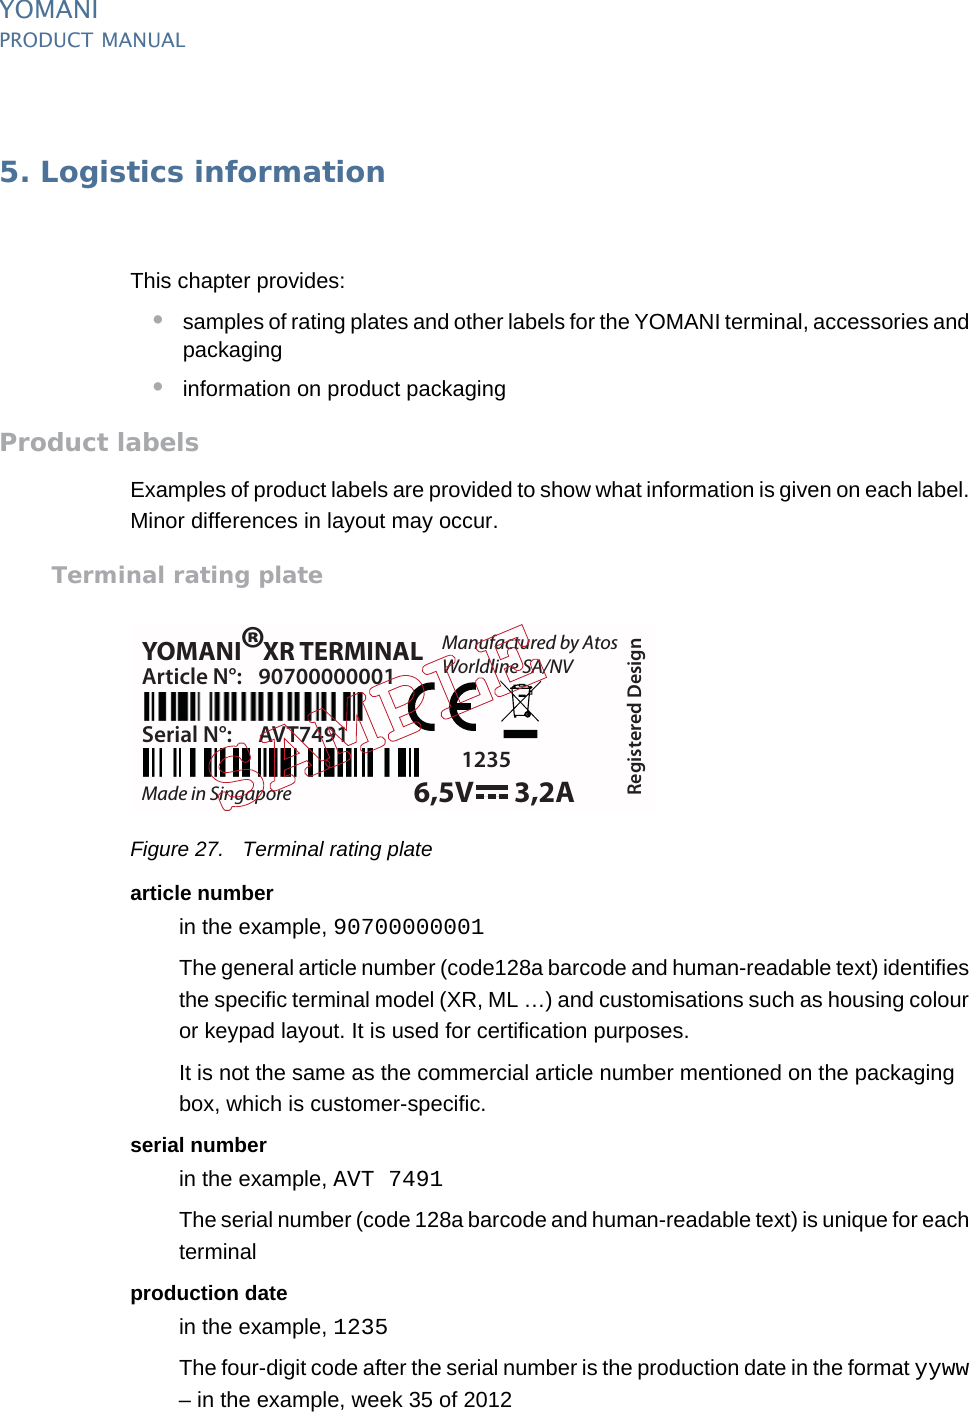 PUBLIC 33pm_ymn_logistics.fm document release 2.1 last updated 8/11/13YOMANIPRODUCT MANUAL5. Logistics informationThis chapter provides:•samples of rating plates and other labels for the YOMANI terminal, accessories and packaging•information on product packagingProduct labelsExamples of product labels are provided to show what information is given on each label. Minor differences in layout may occur.Terminal rating plateFigure 27. Terminal rating platearticle numberin the example, 90700000001The general article number (code128a barcode and human-readable text) identifies the specific terminal model (XR, ML …) and customisations such as housing colour or keypad layout. It is used for certification purposes.It is not the same as the commercial article number mentioned on the packaging box, which is customer-specific.serial numberin the example, AVT 7491The serial number (code 128a barcode and human-readable text) is unique for each terminalproduction datein the example, 1235The four-digit code after the serial number is the production date in the format yyww – in the example, week 35 of 2012YOMANI XR TERMINALManufactured by AtosWorldline SA/NVMade in SingaporeArticle N°: 90700000001Serial N°: AVT7491Registered Design1235®6,5V 3,2A